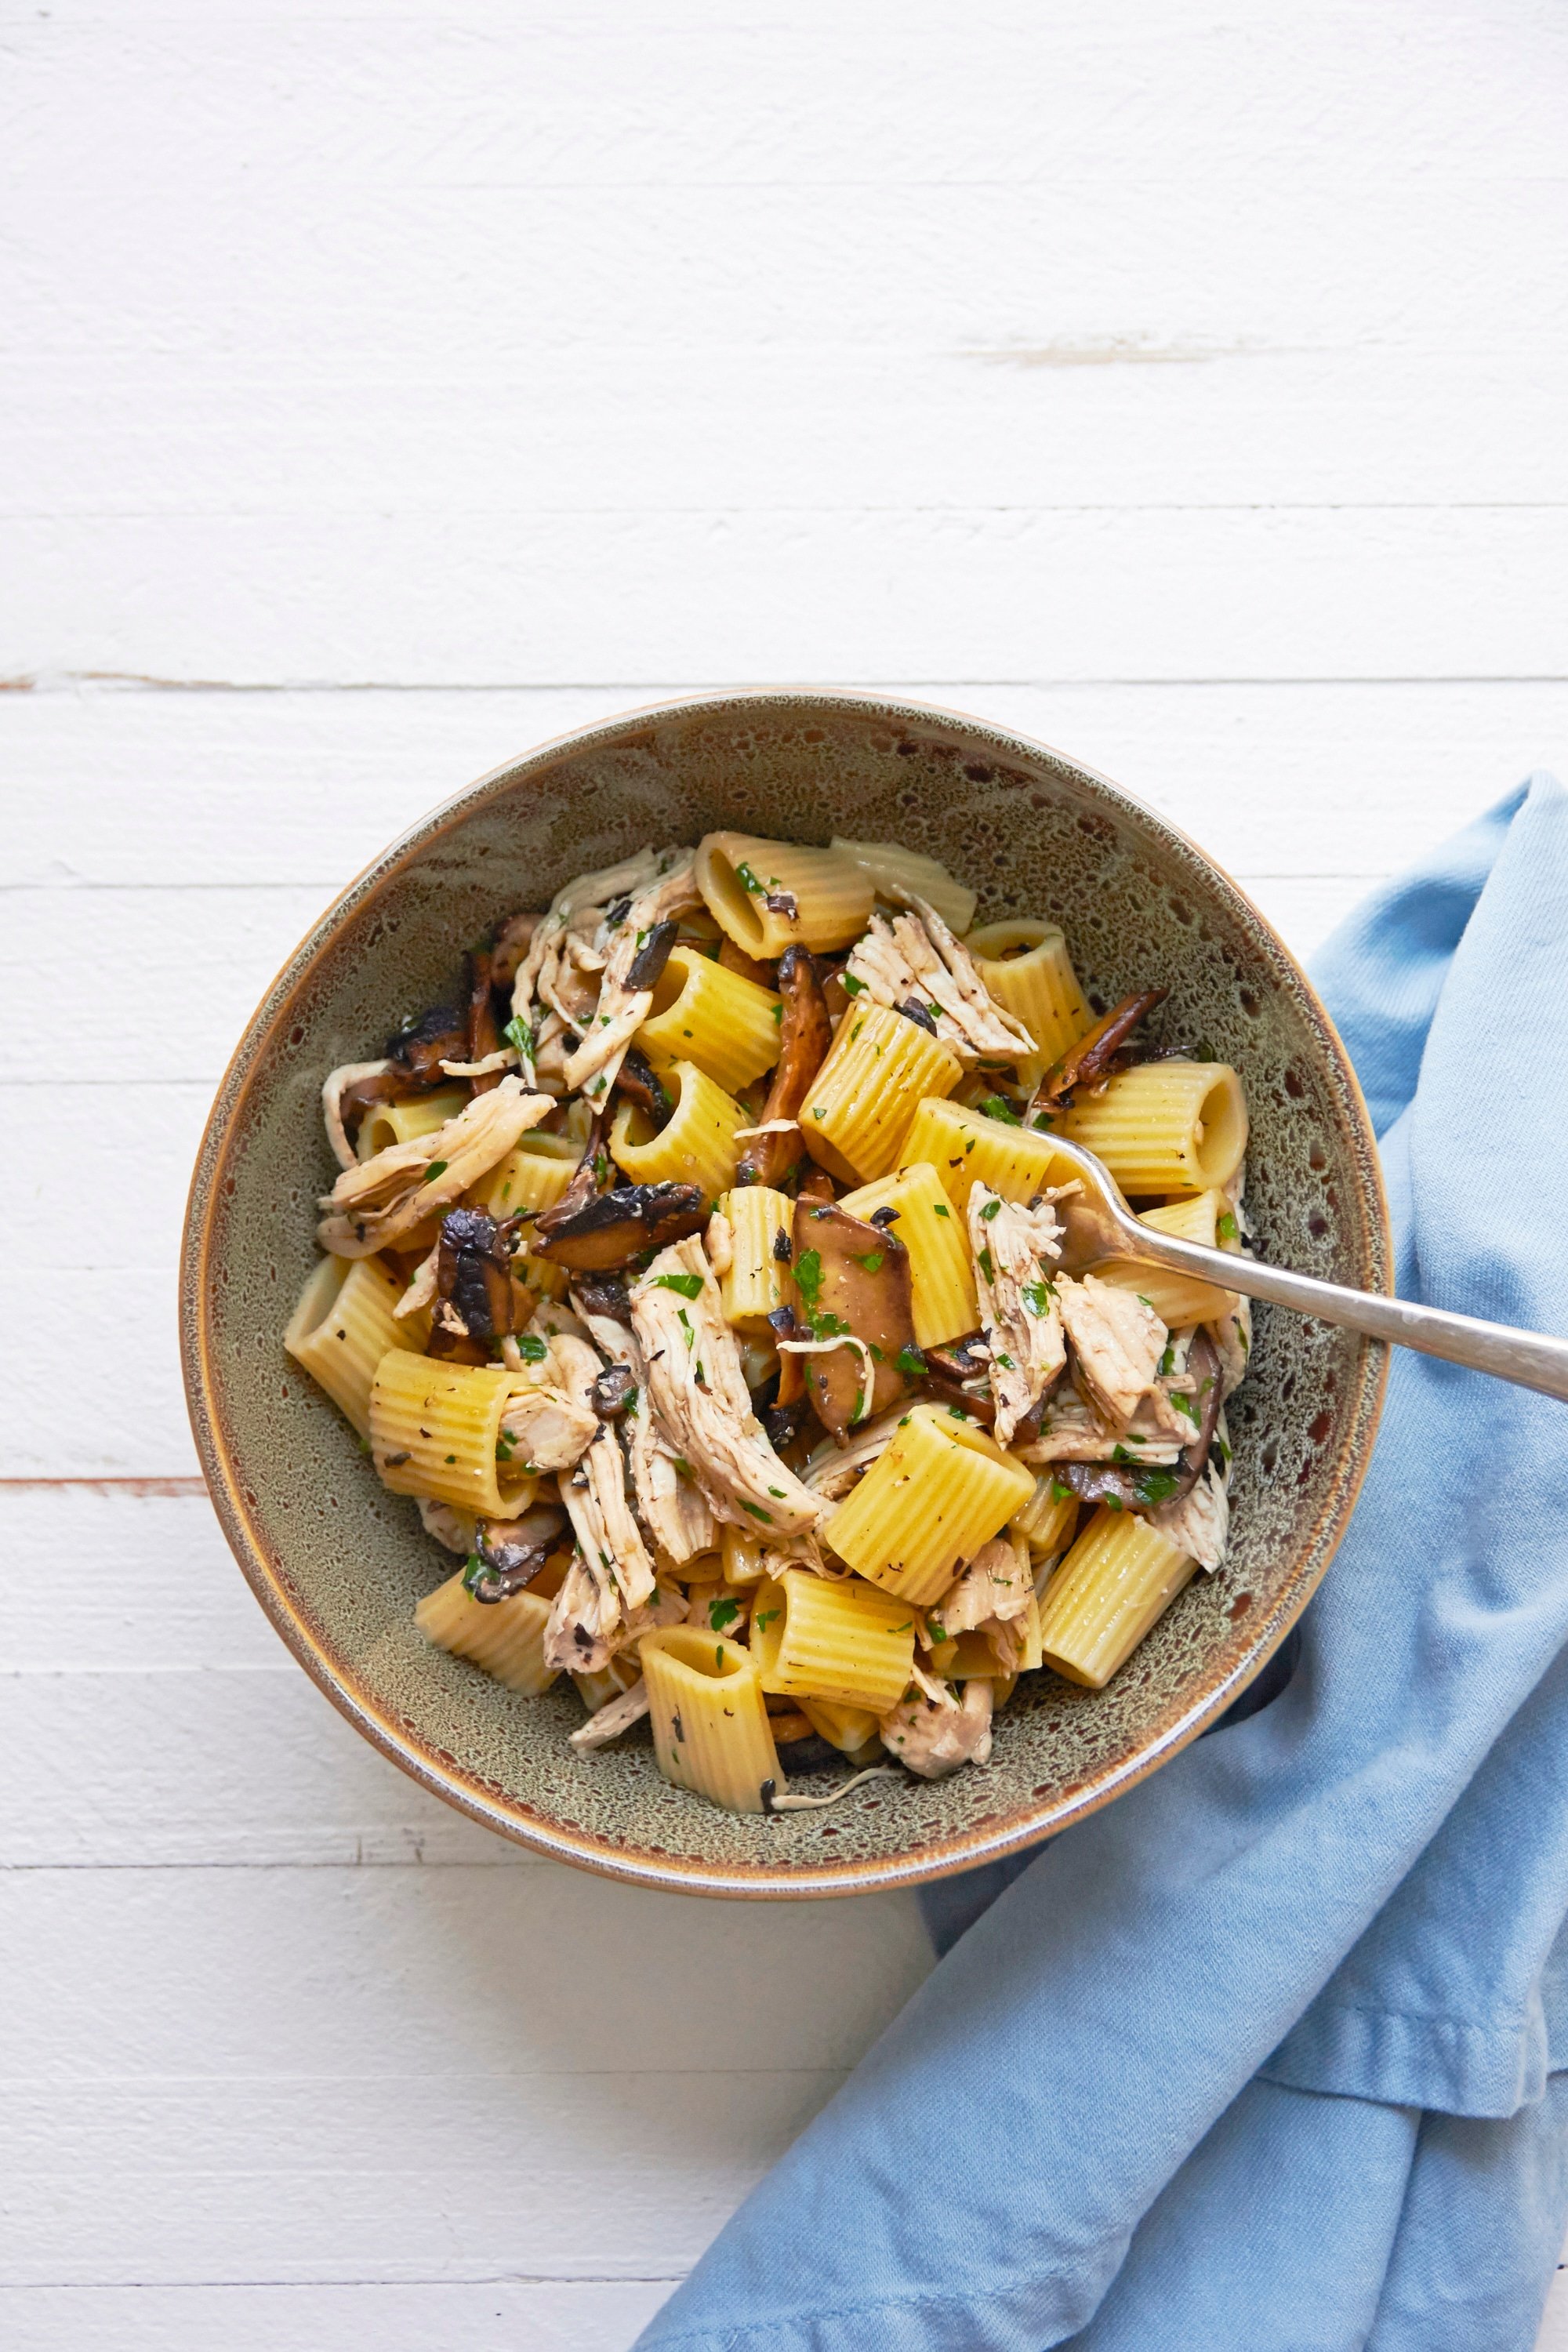 Pasta with chicken and mushrooms in a bowl.